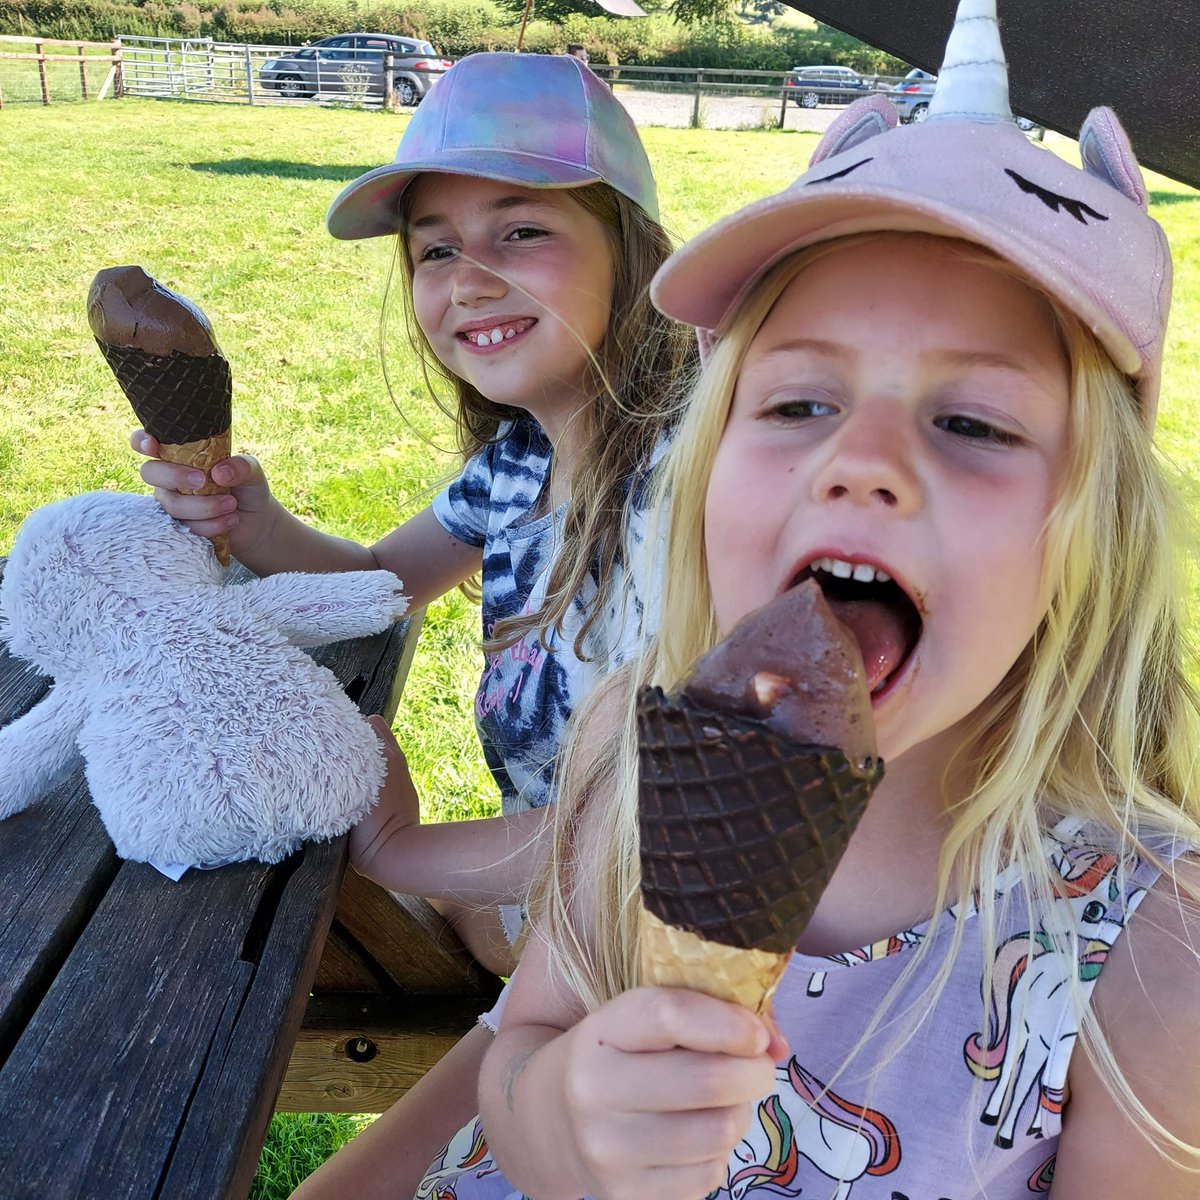 Cooling off after work with delicious jersey ice cream @ Abbott Lodge, near Penrith #jerseyicecream #abbottlodge #heatwave